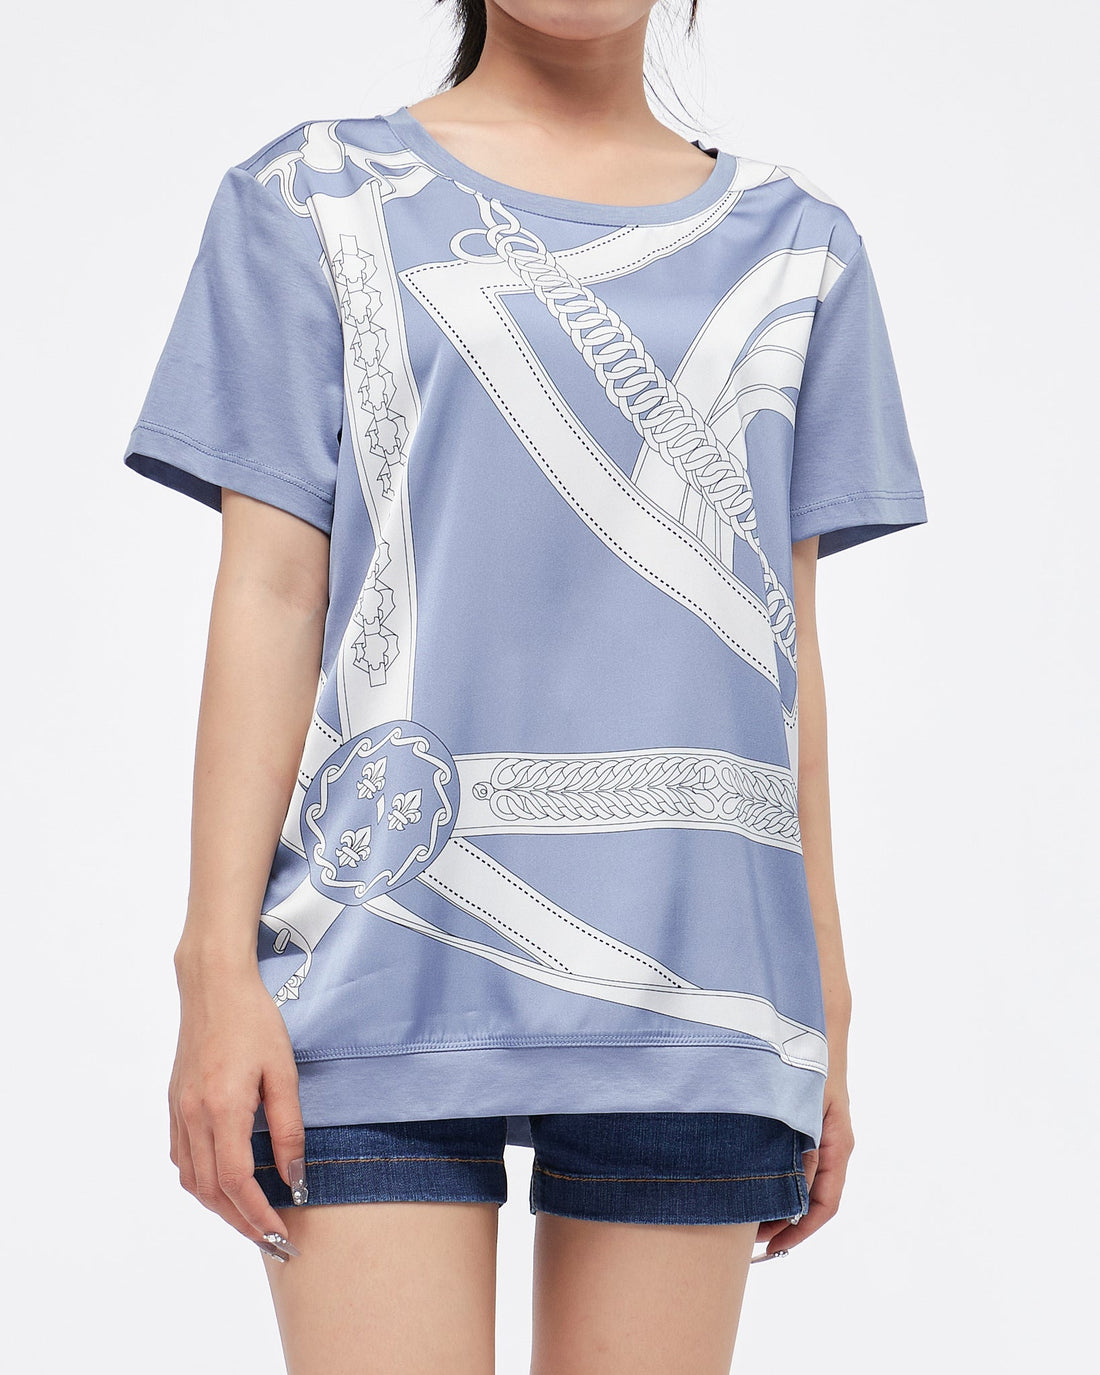 MOI OUTFIT-L Chain Over Printed Lady T-Shirt 18.90